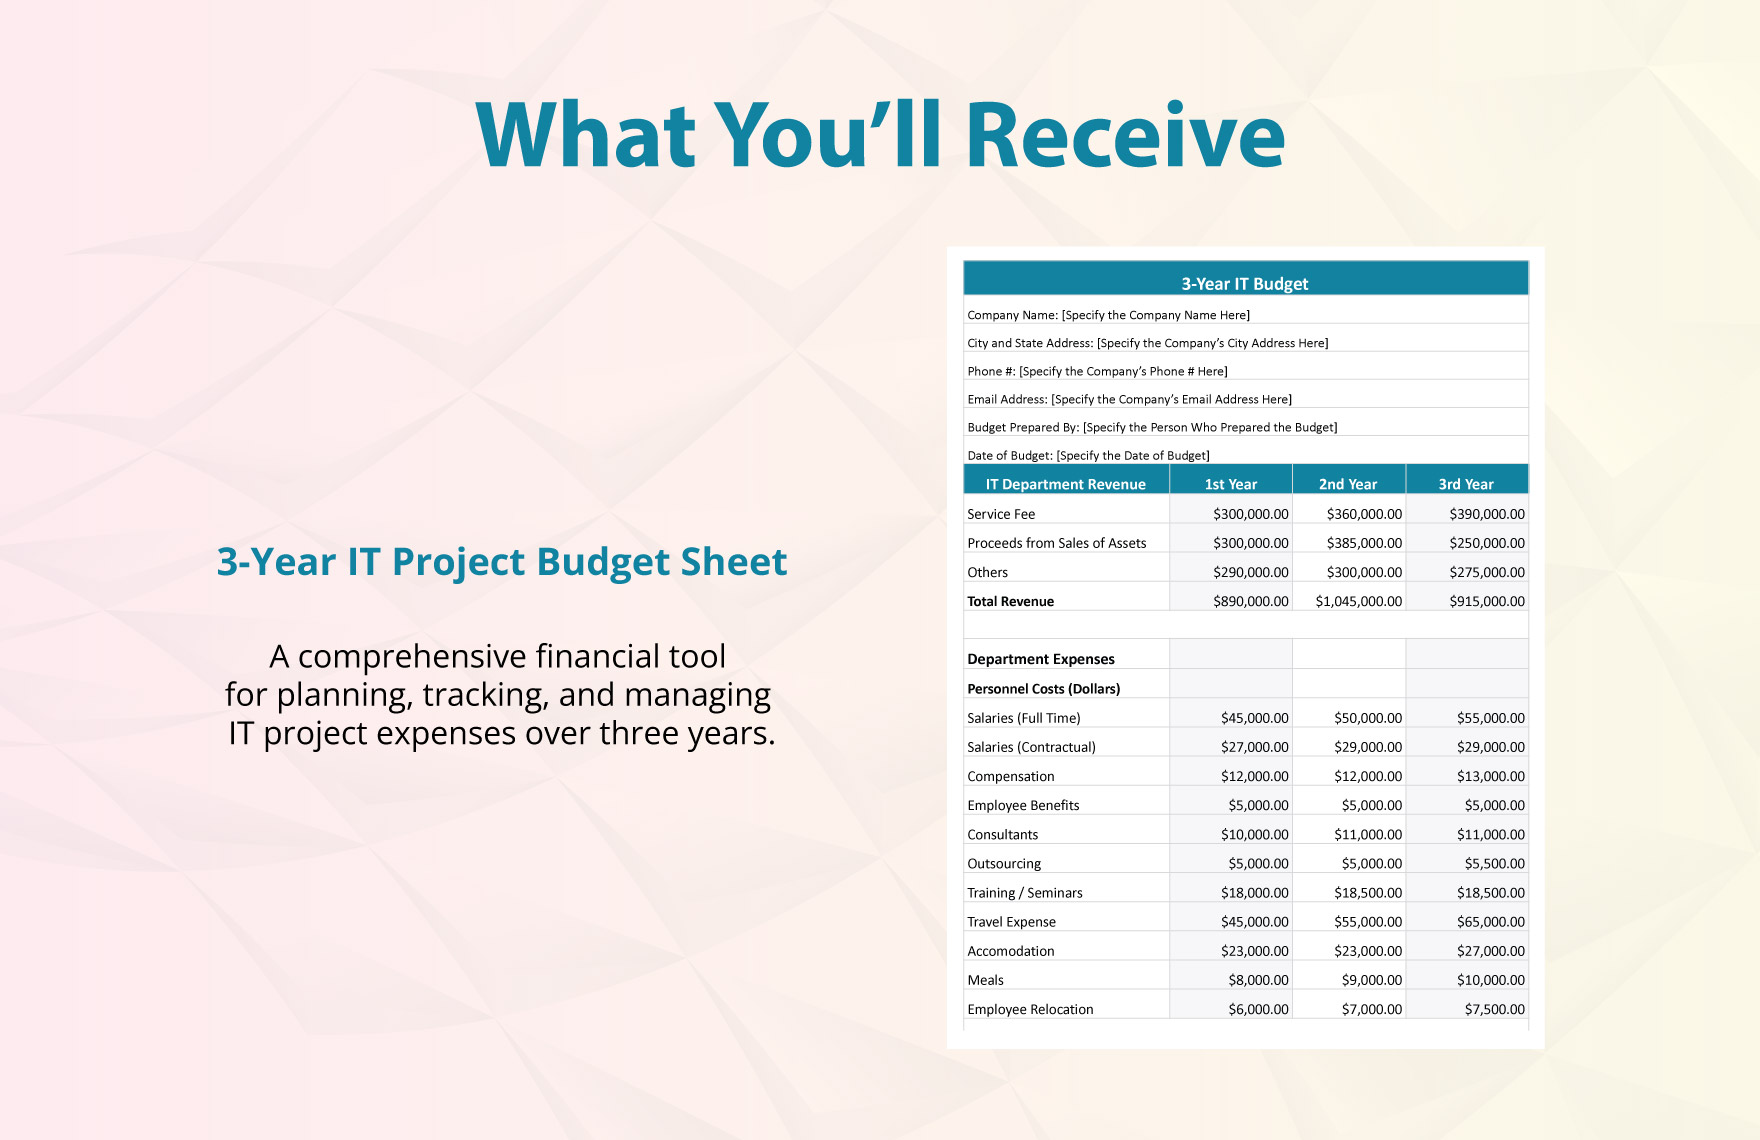 3-Year IT Project Budget Template